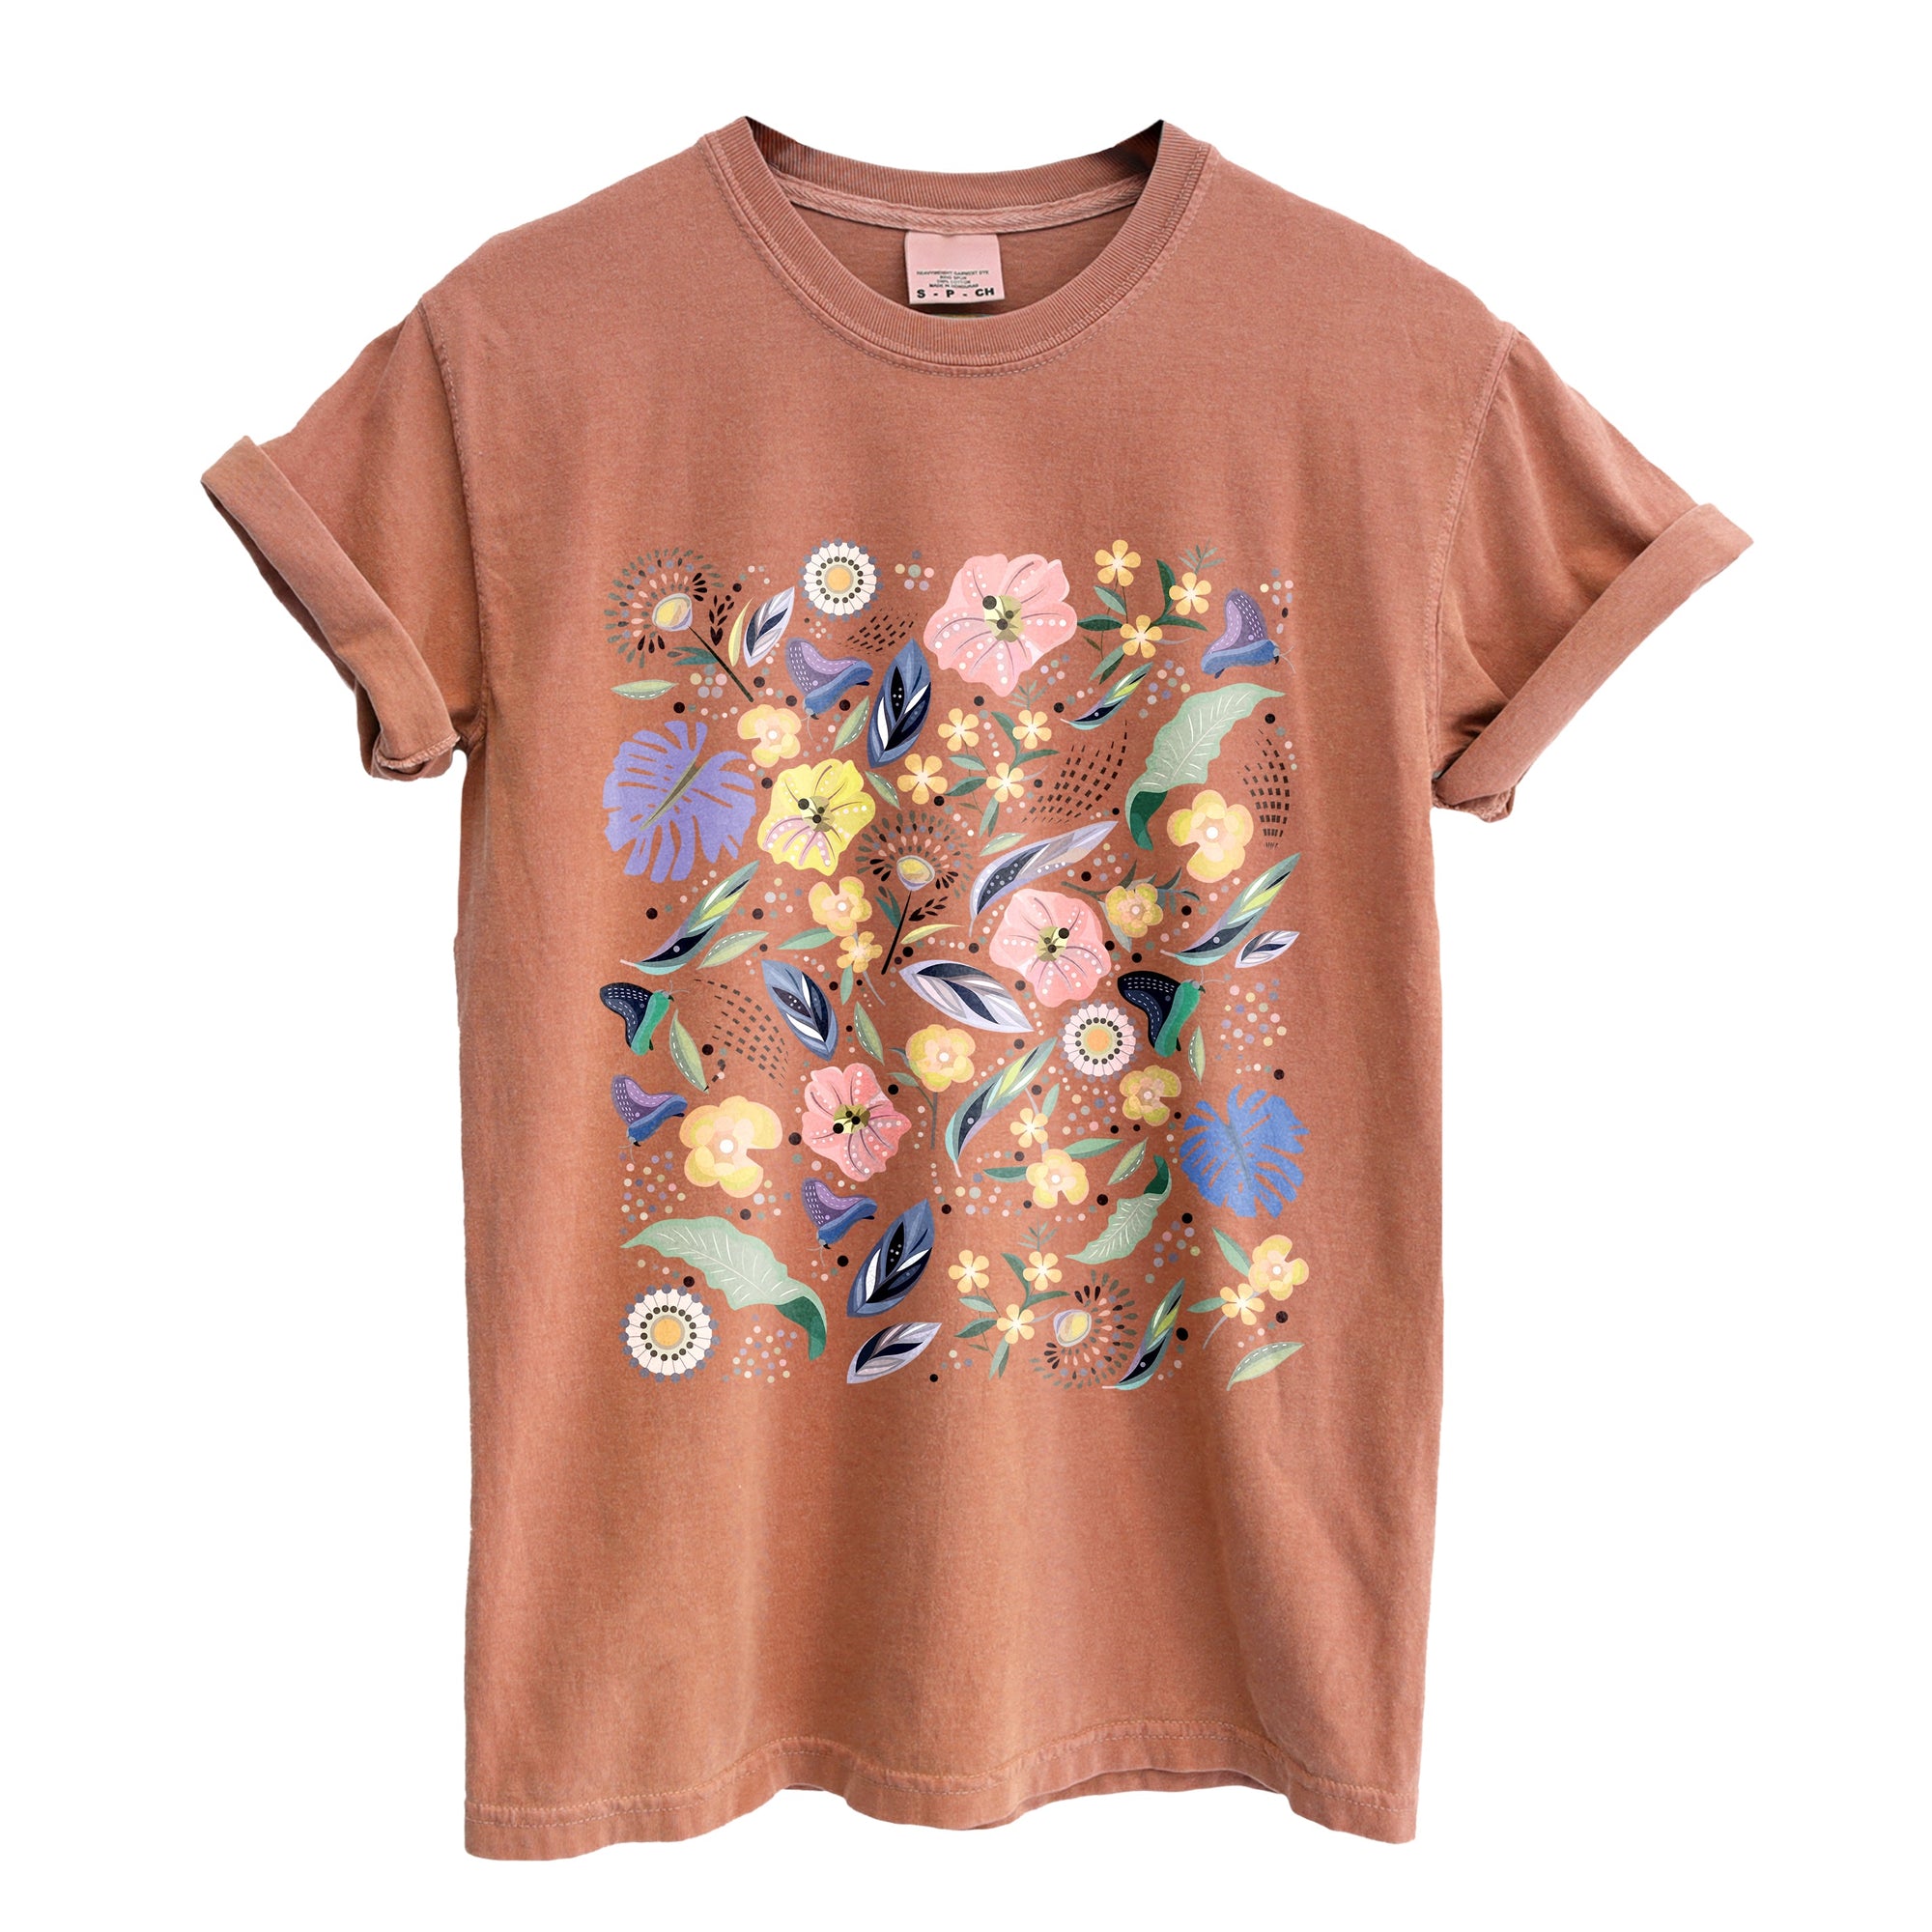 Wildflower Blossom Garment-Dyed Tee - Stories You Can Wear